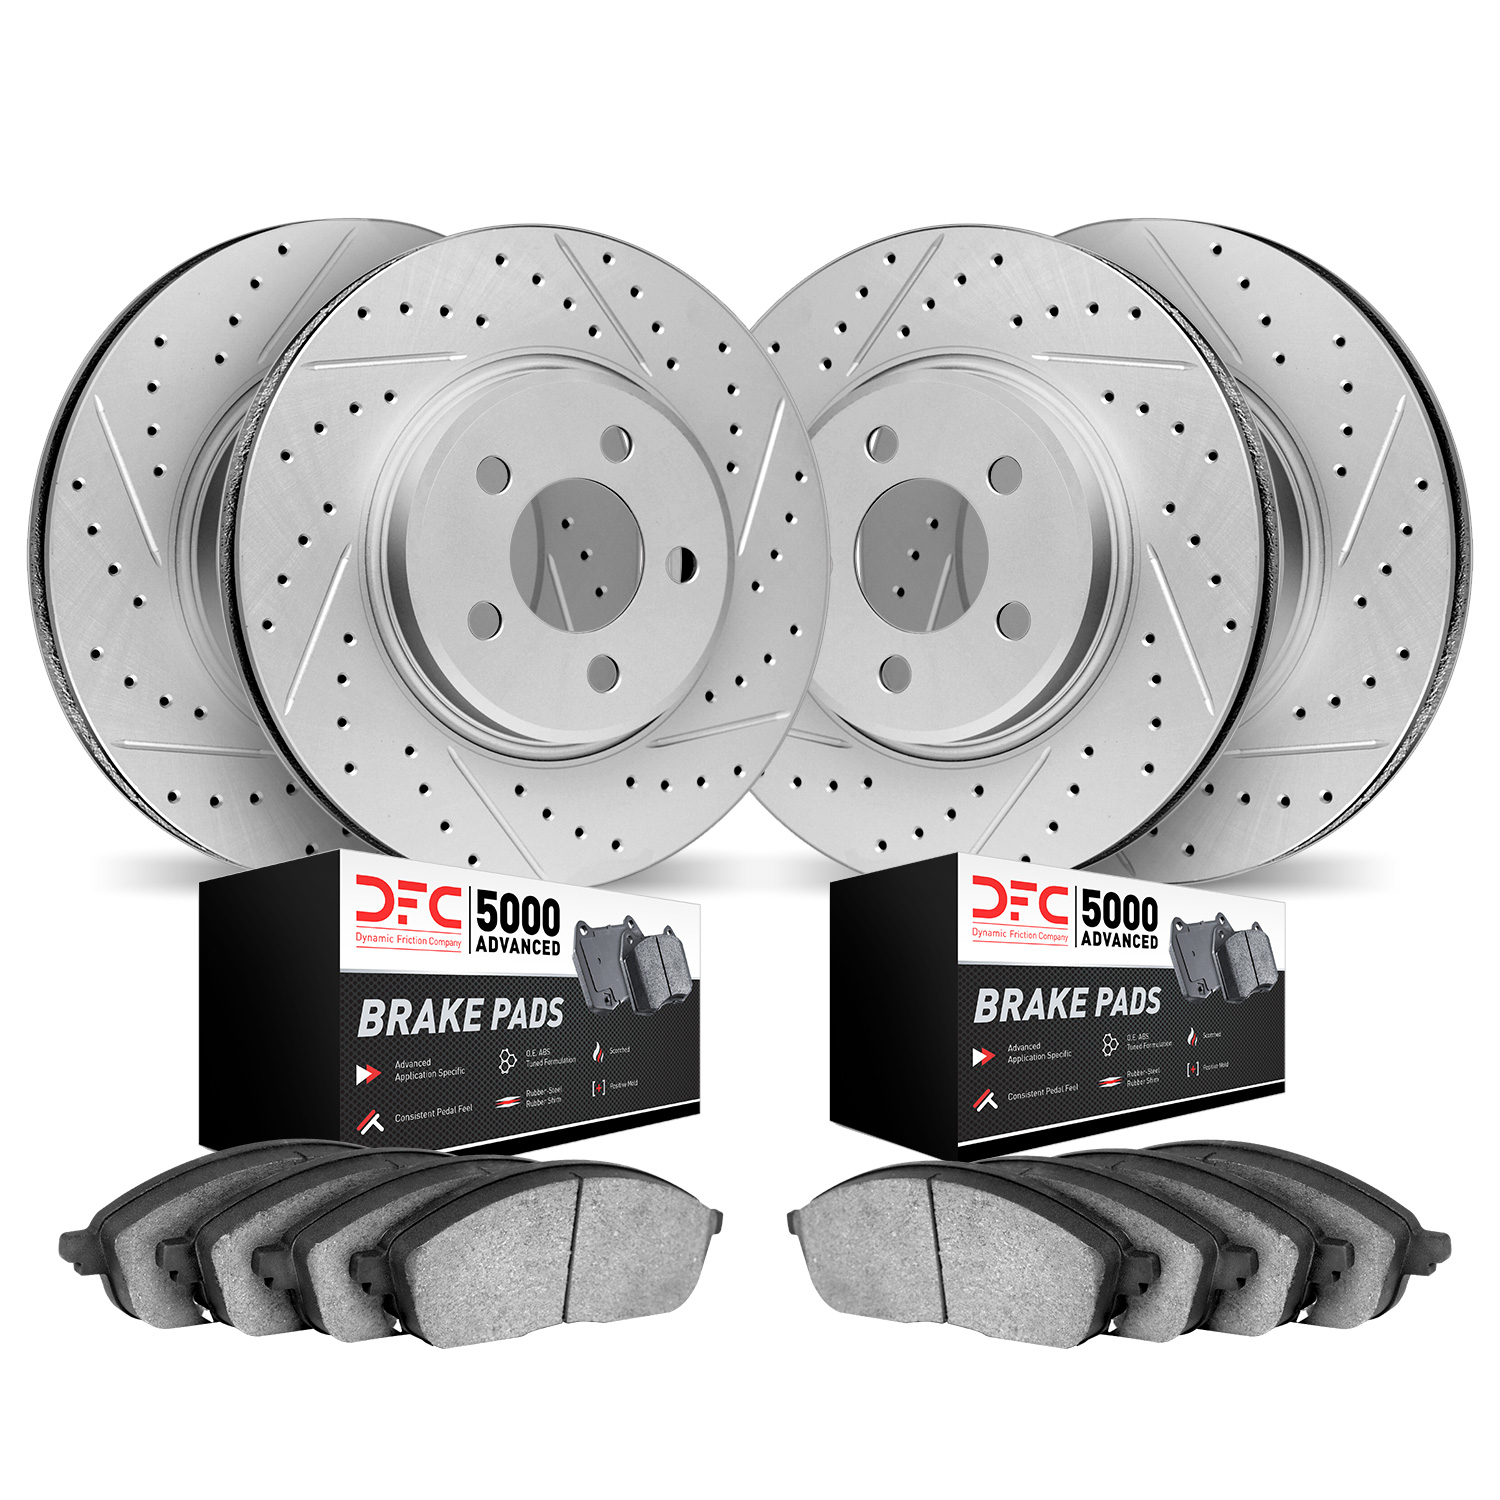 2504-31052 Geoperformance Drilled/Slotted Rotors w/5000 Advanced Brake Pads Kit, 2007-2015 BMW, Position: Front and Rear